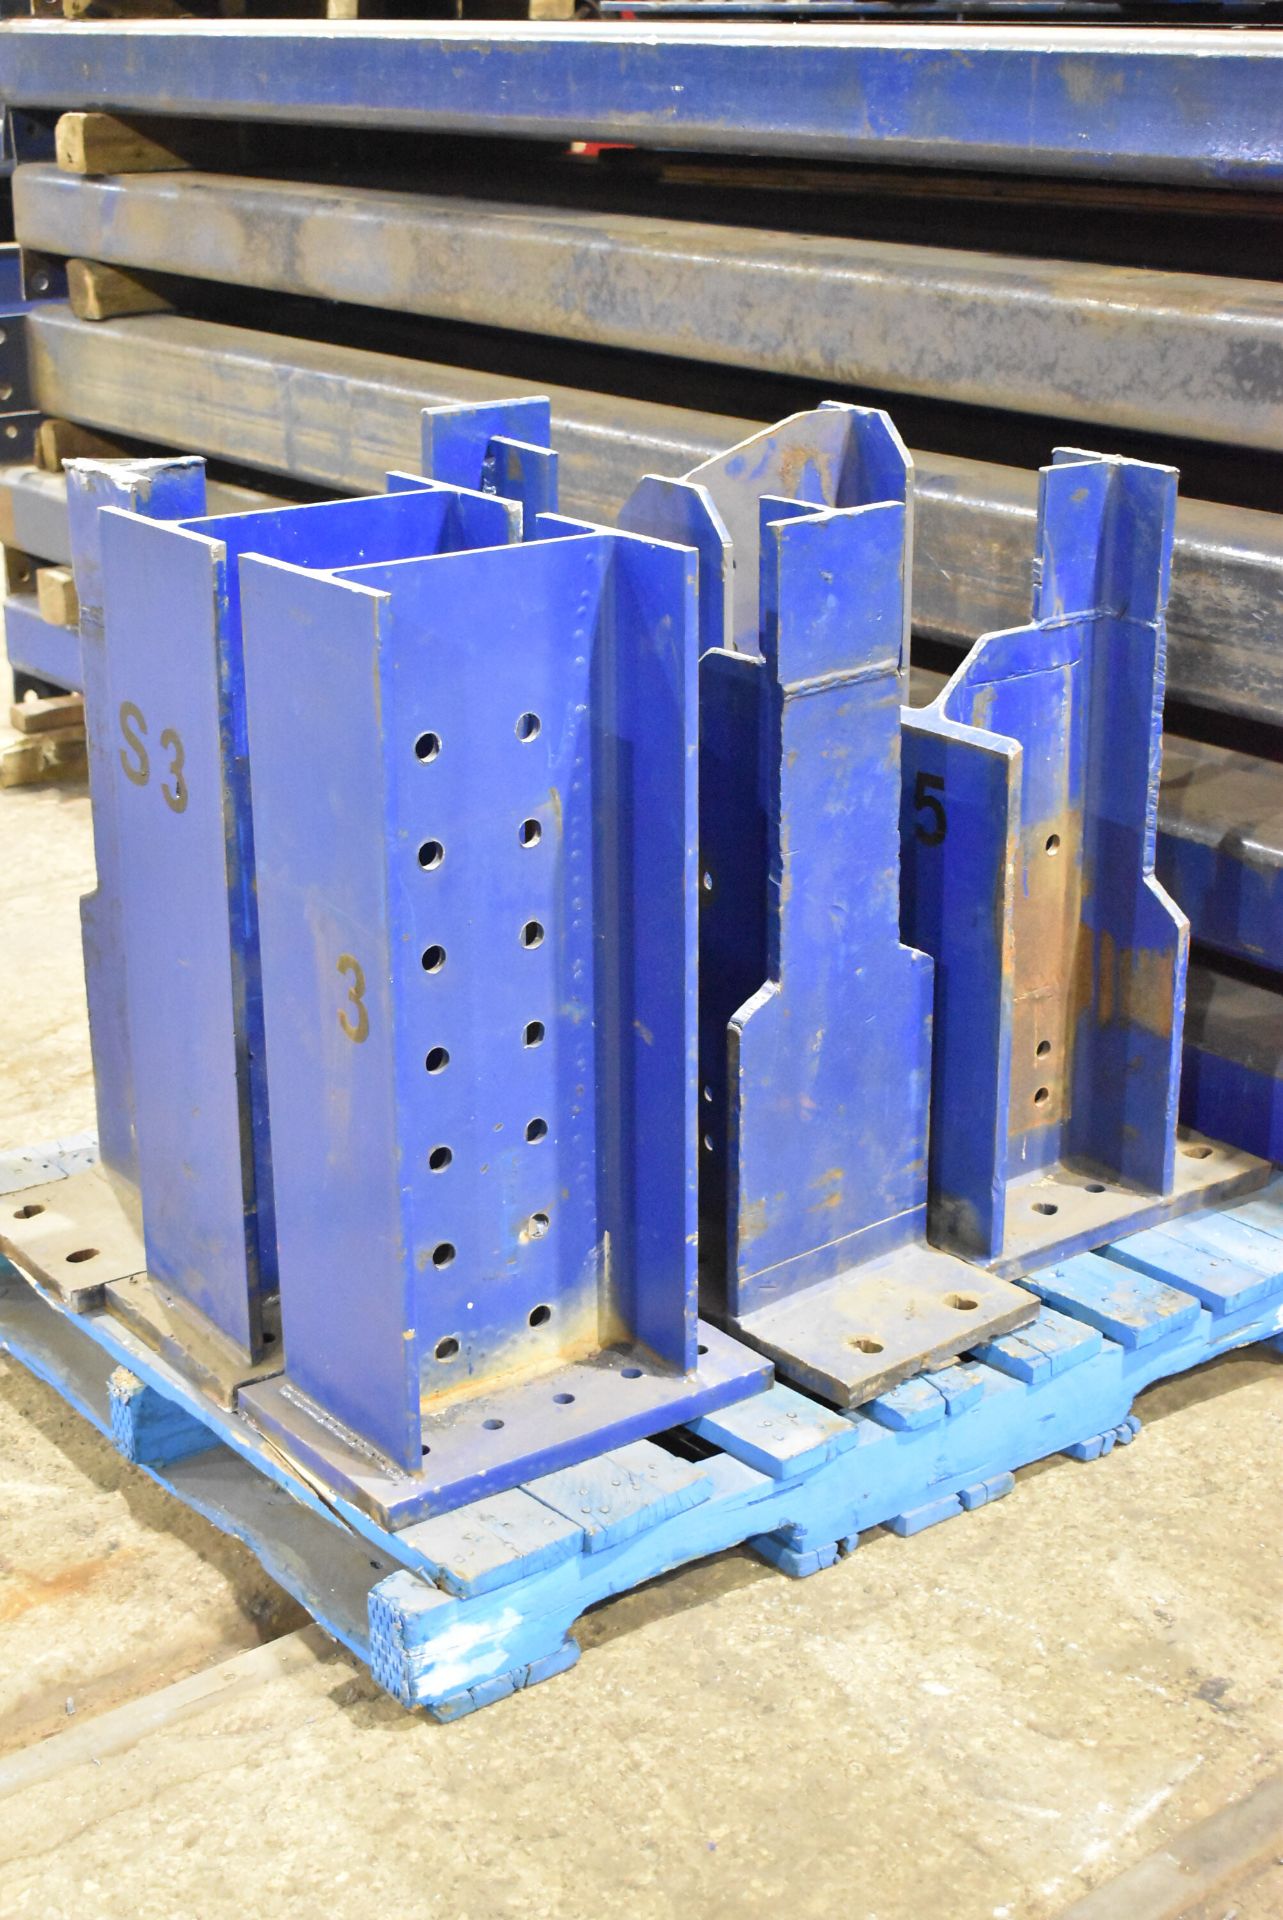 CAPITOL STEEL STRUCTURAL BEAM WELDING JIG WITH APPROX. 190"X89.5' ADJUSTABLE FRAME (DISASSEMBLED) ( - Image 3 of 6